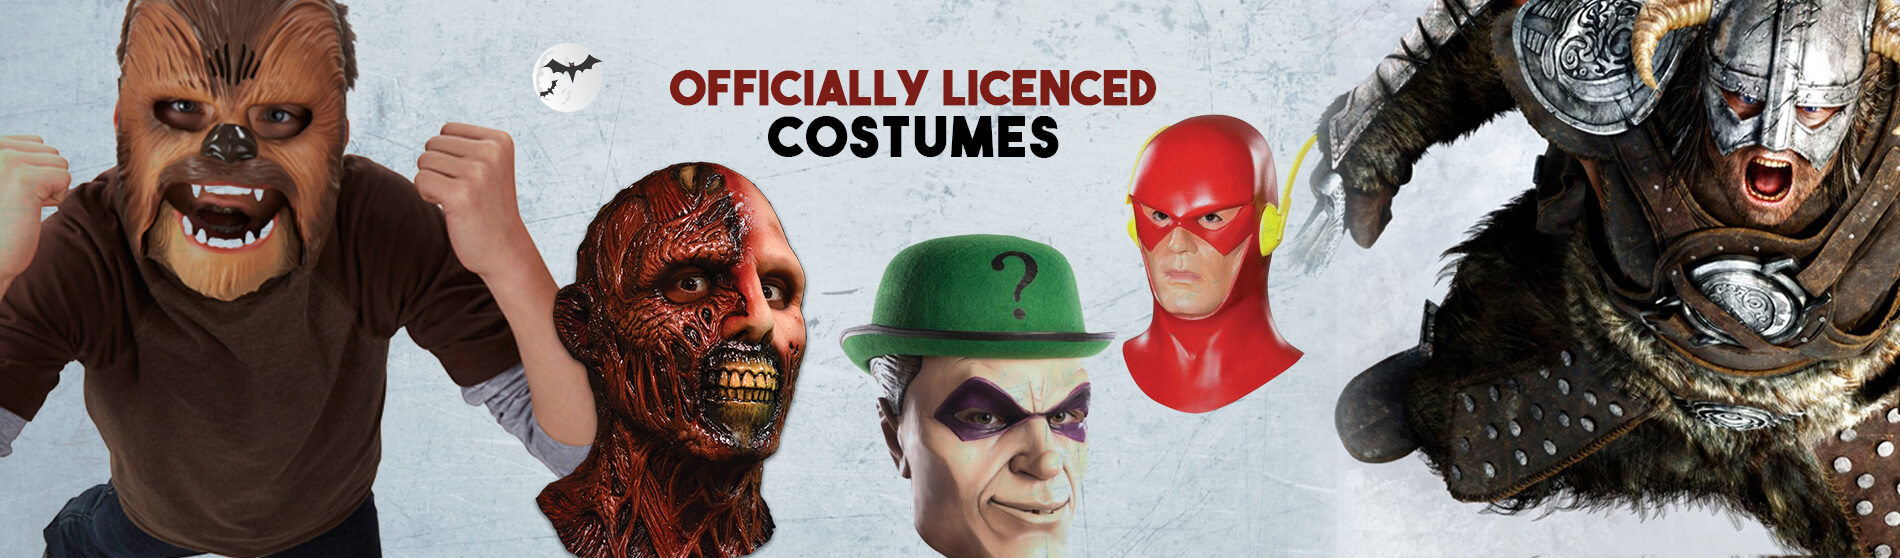 Glendale Halloween : Officially Licenced Masks